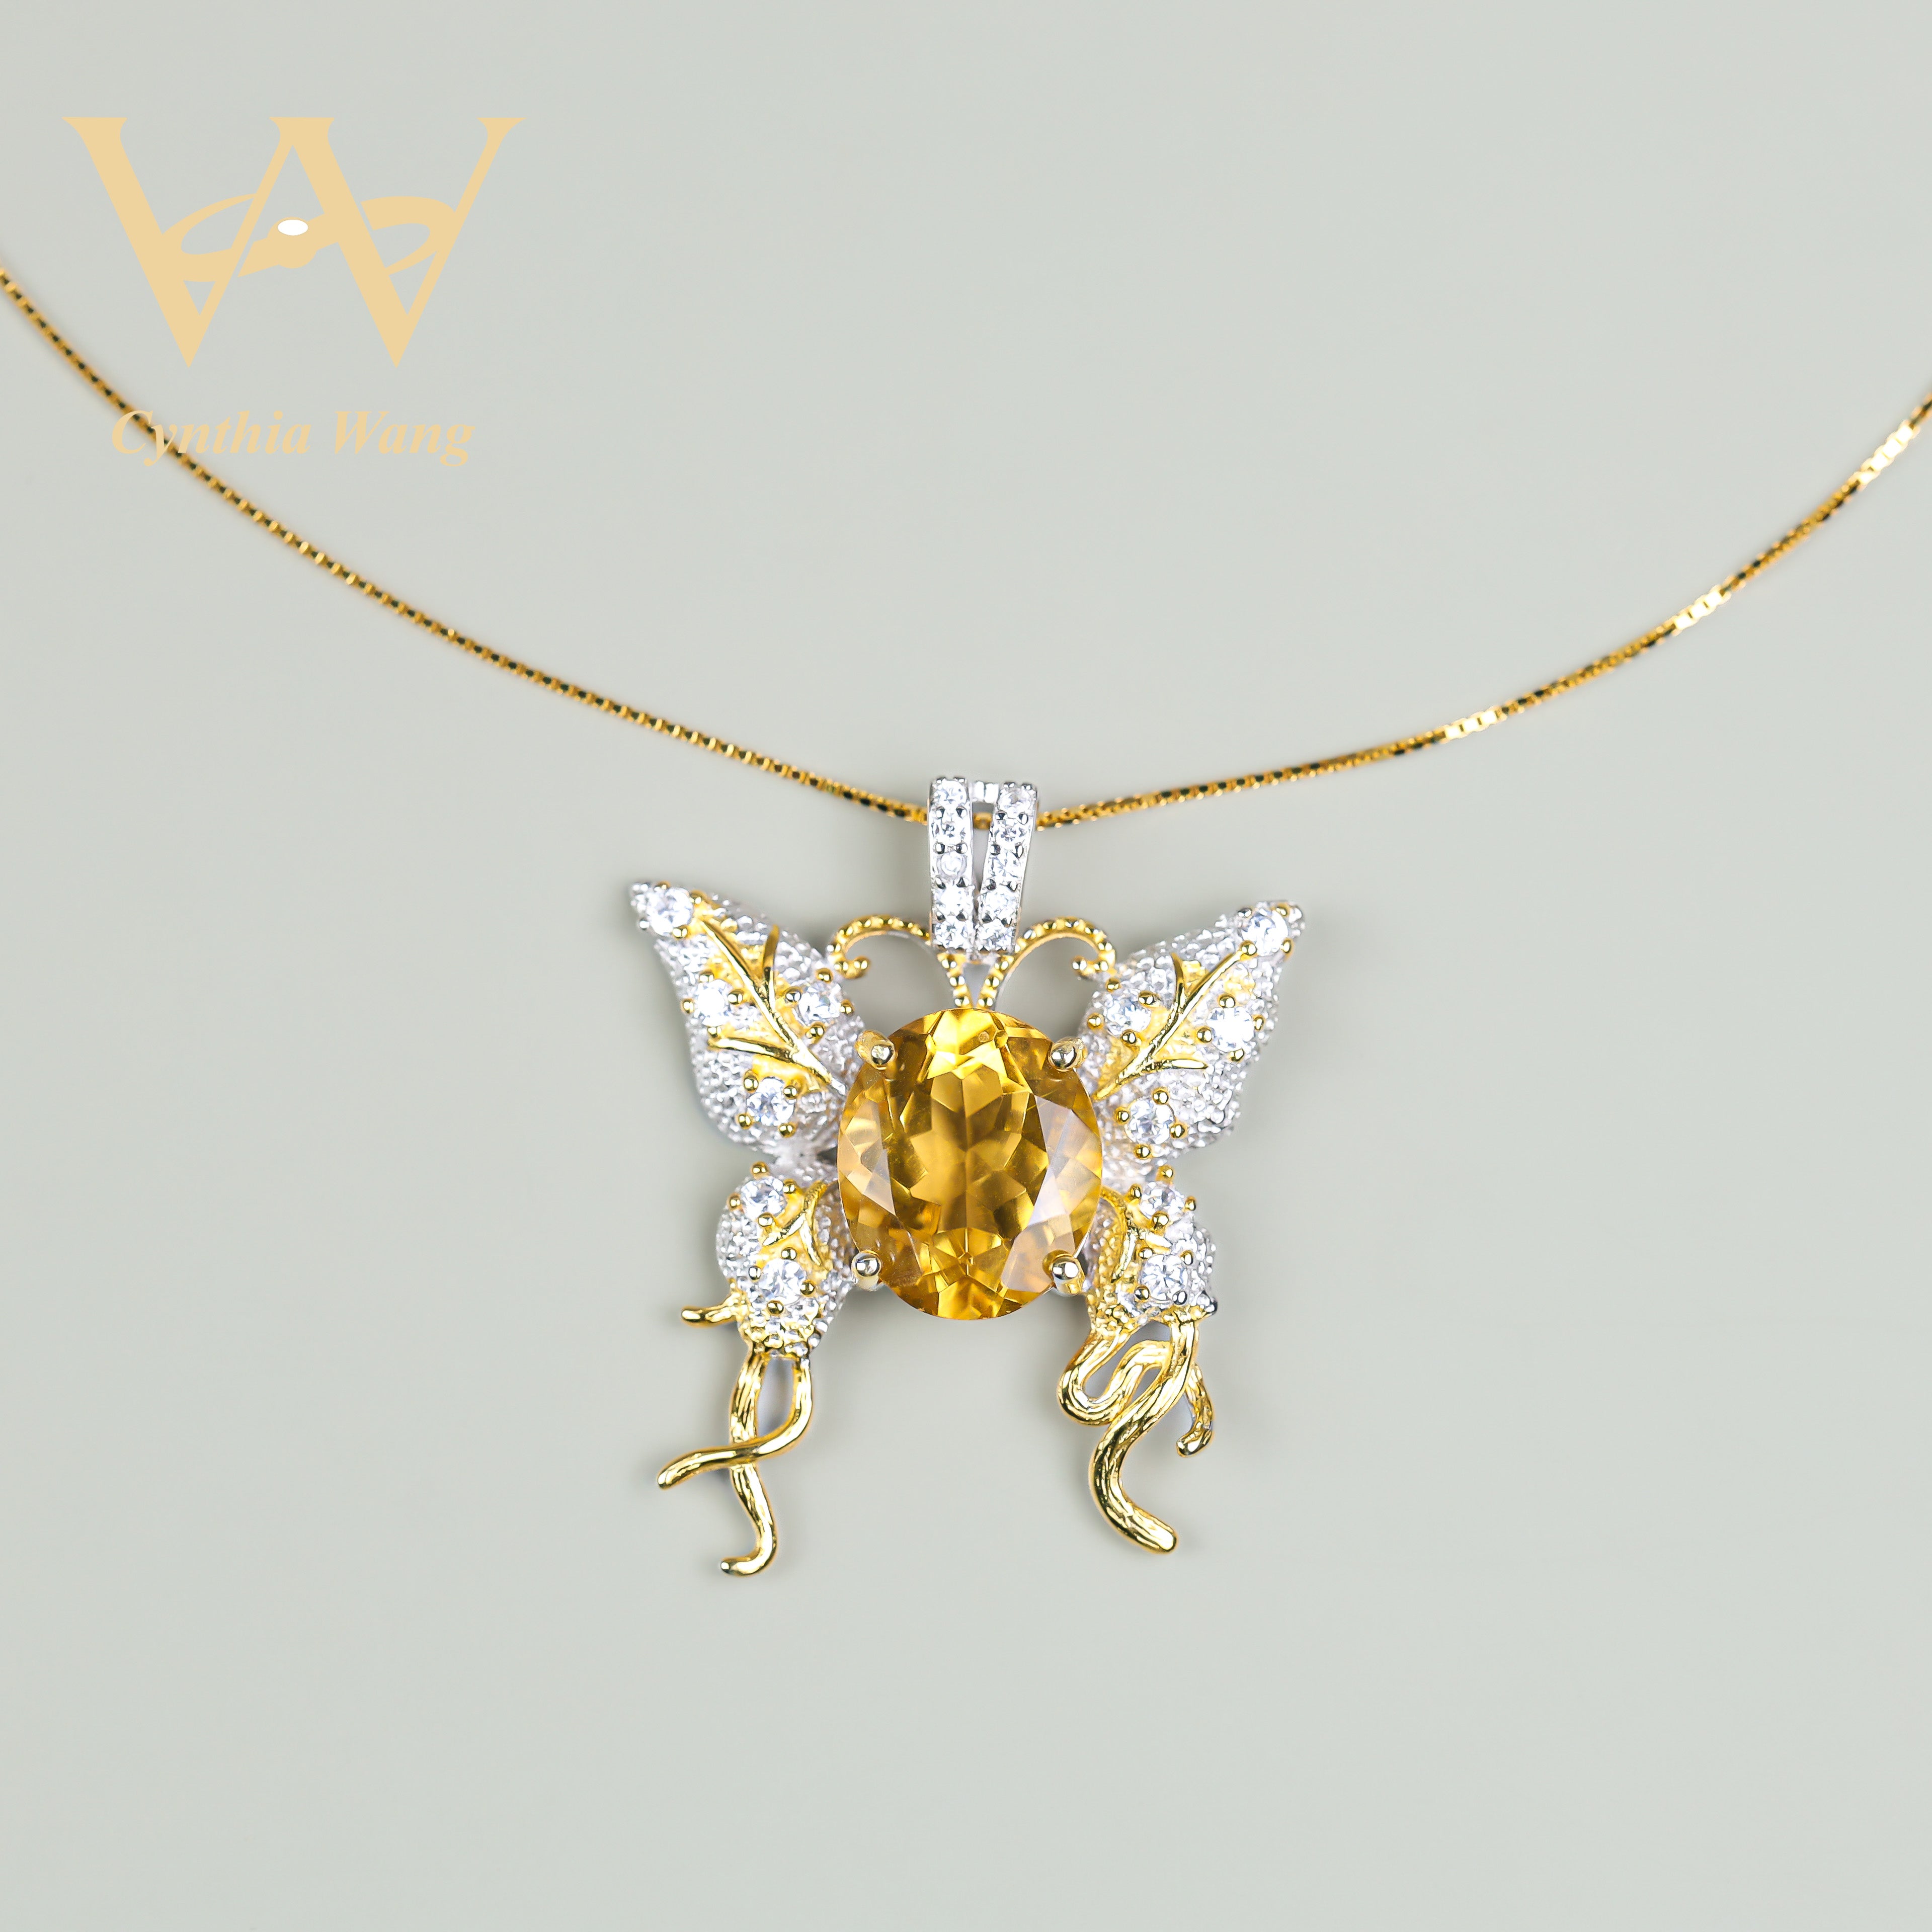 'Butterfly at Sunset' Citrine Necklace